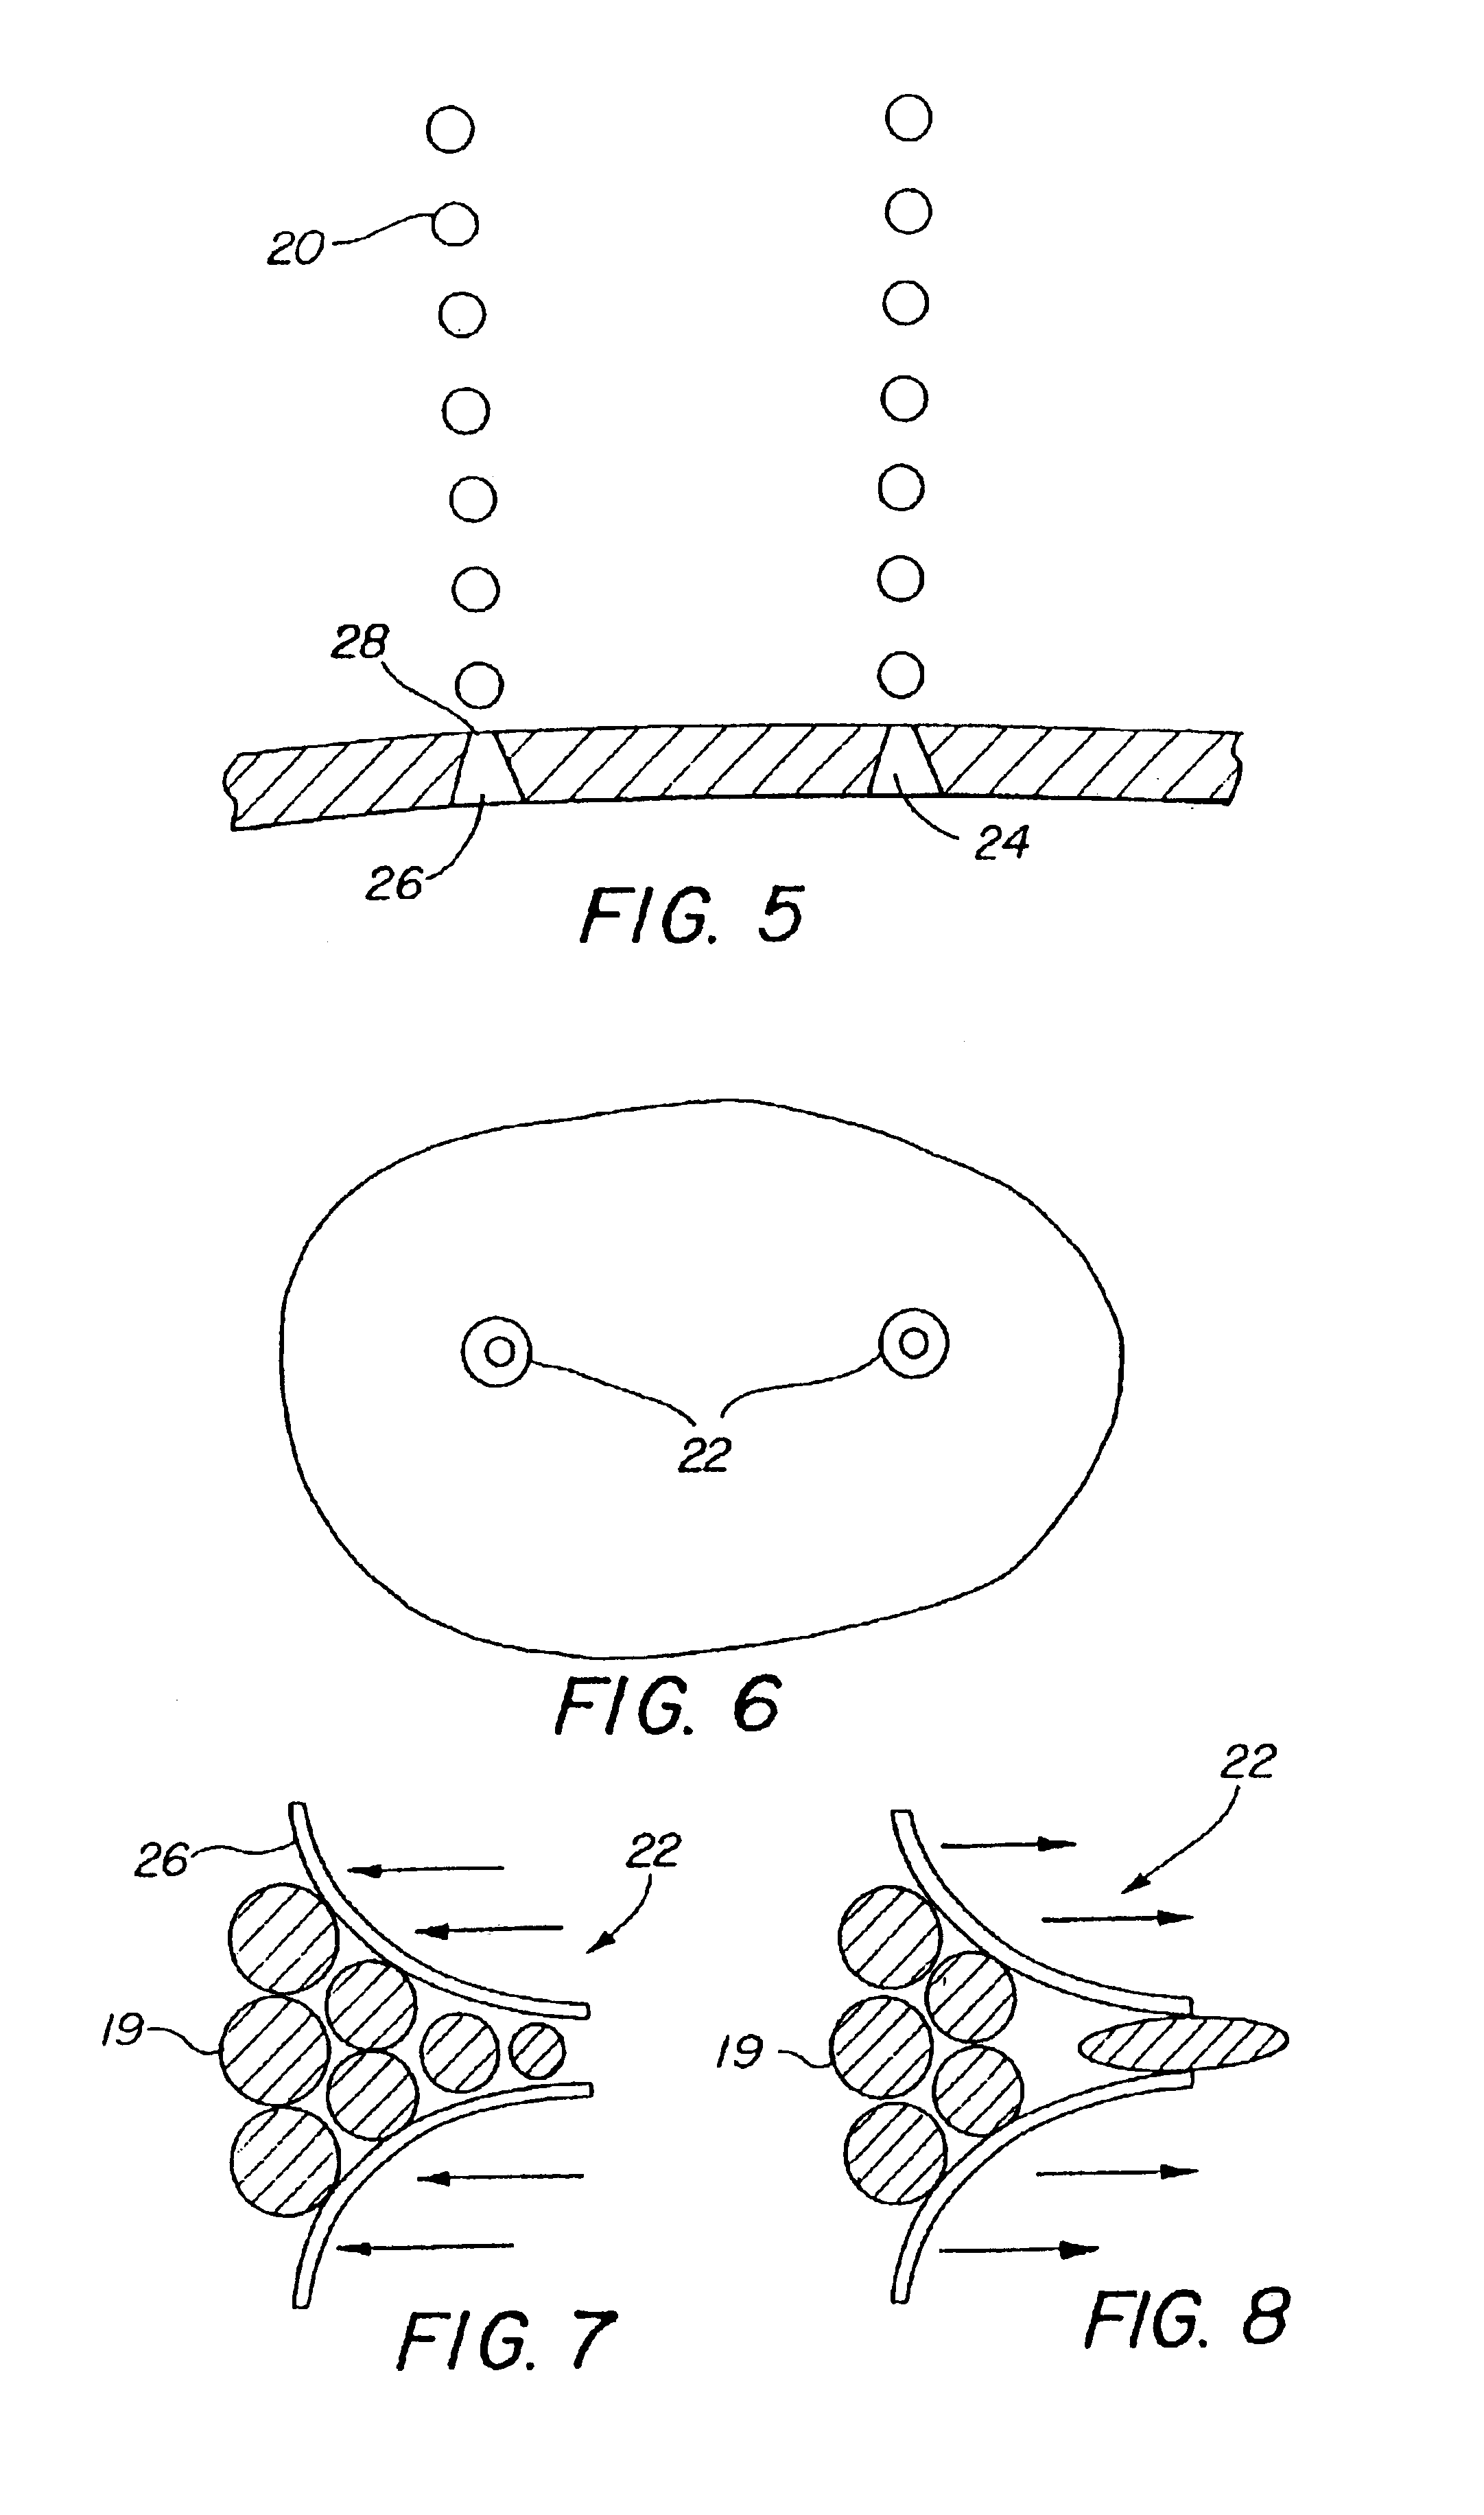 Droplet ejector with oscillating tapered aperture